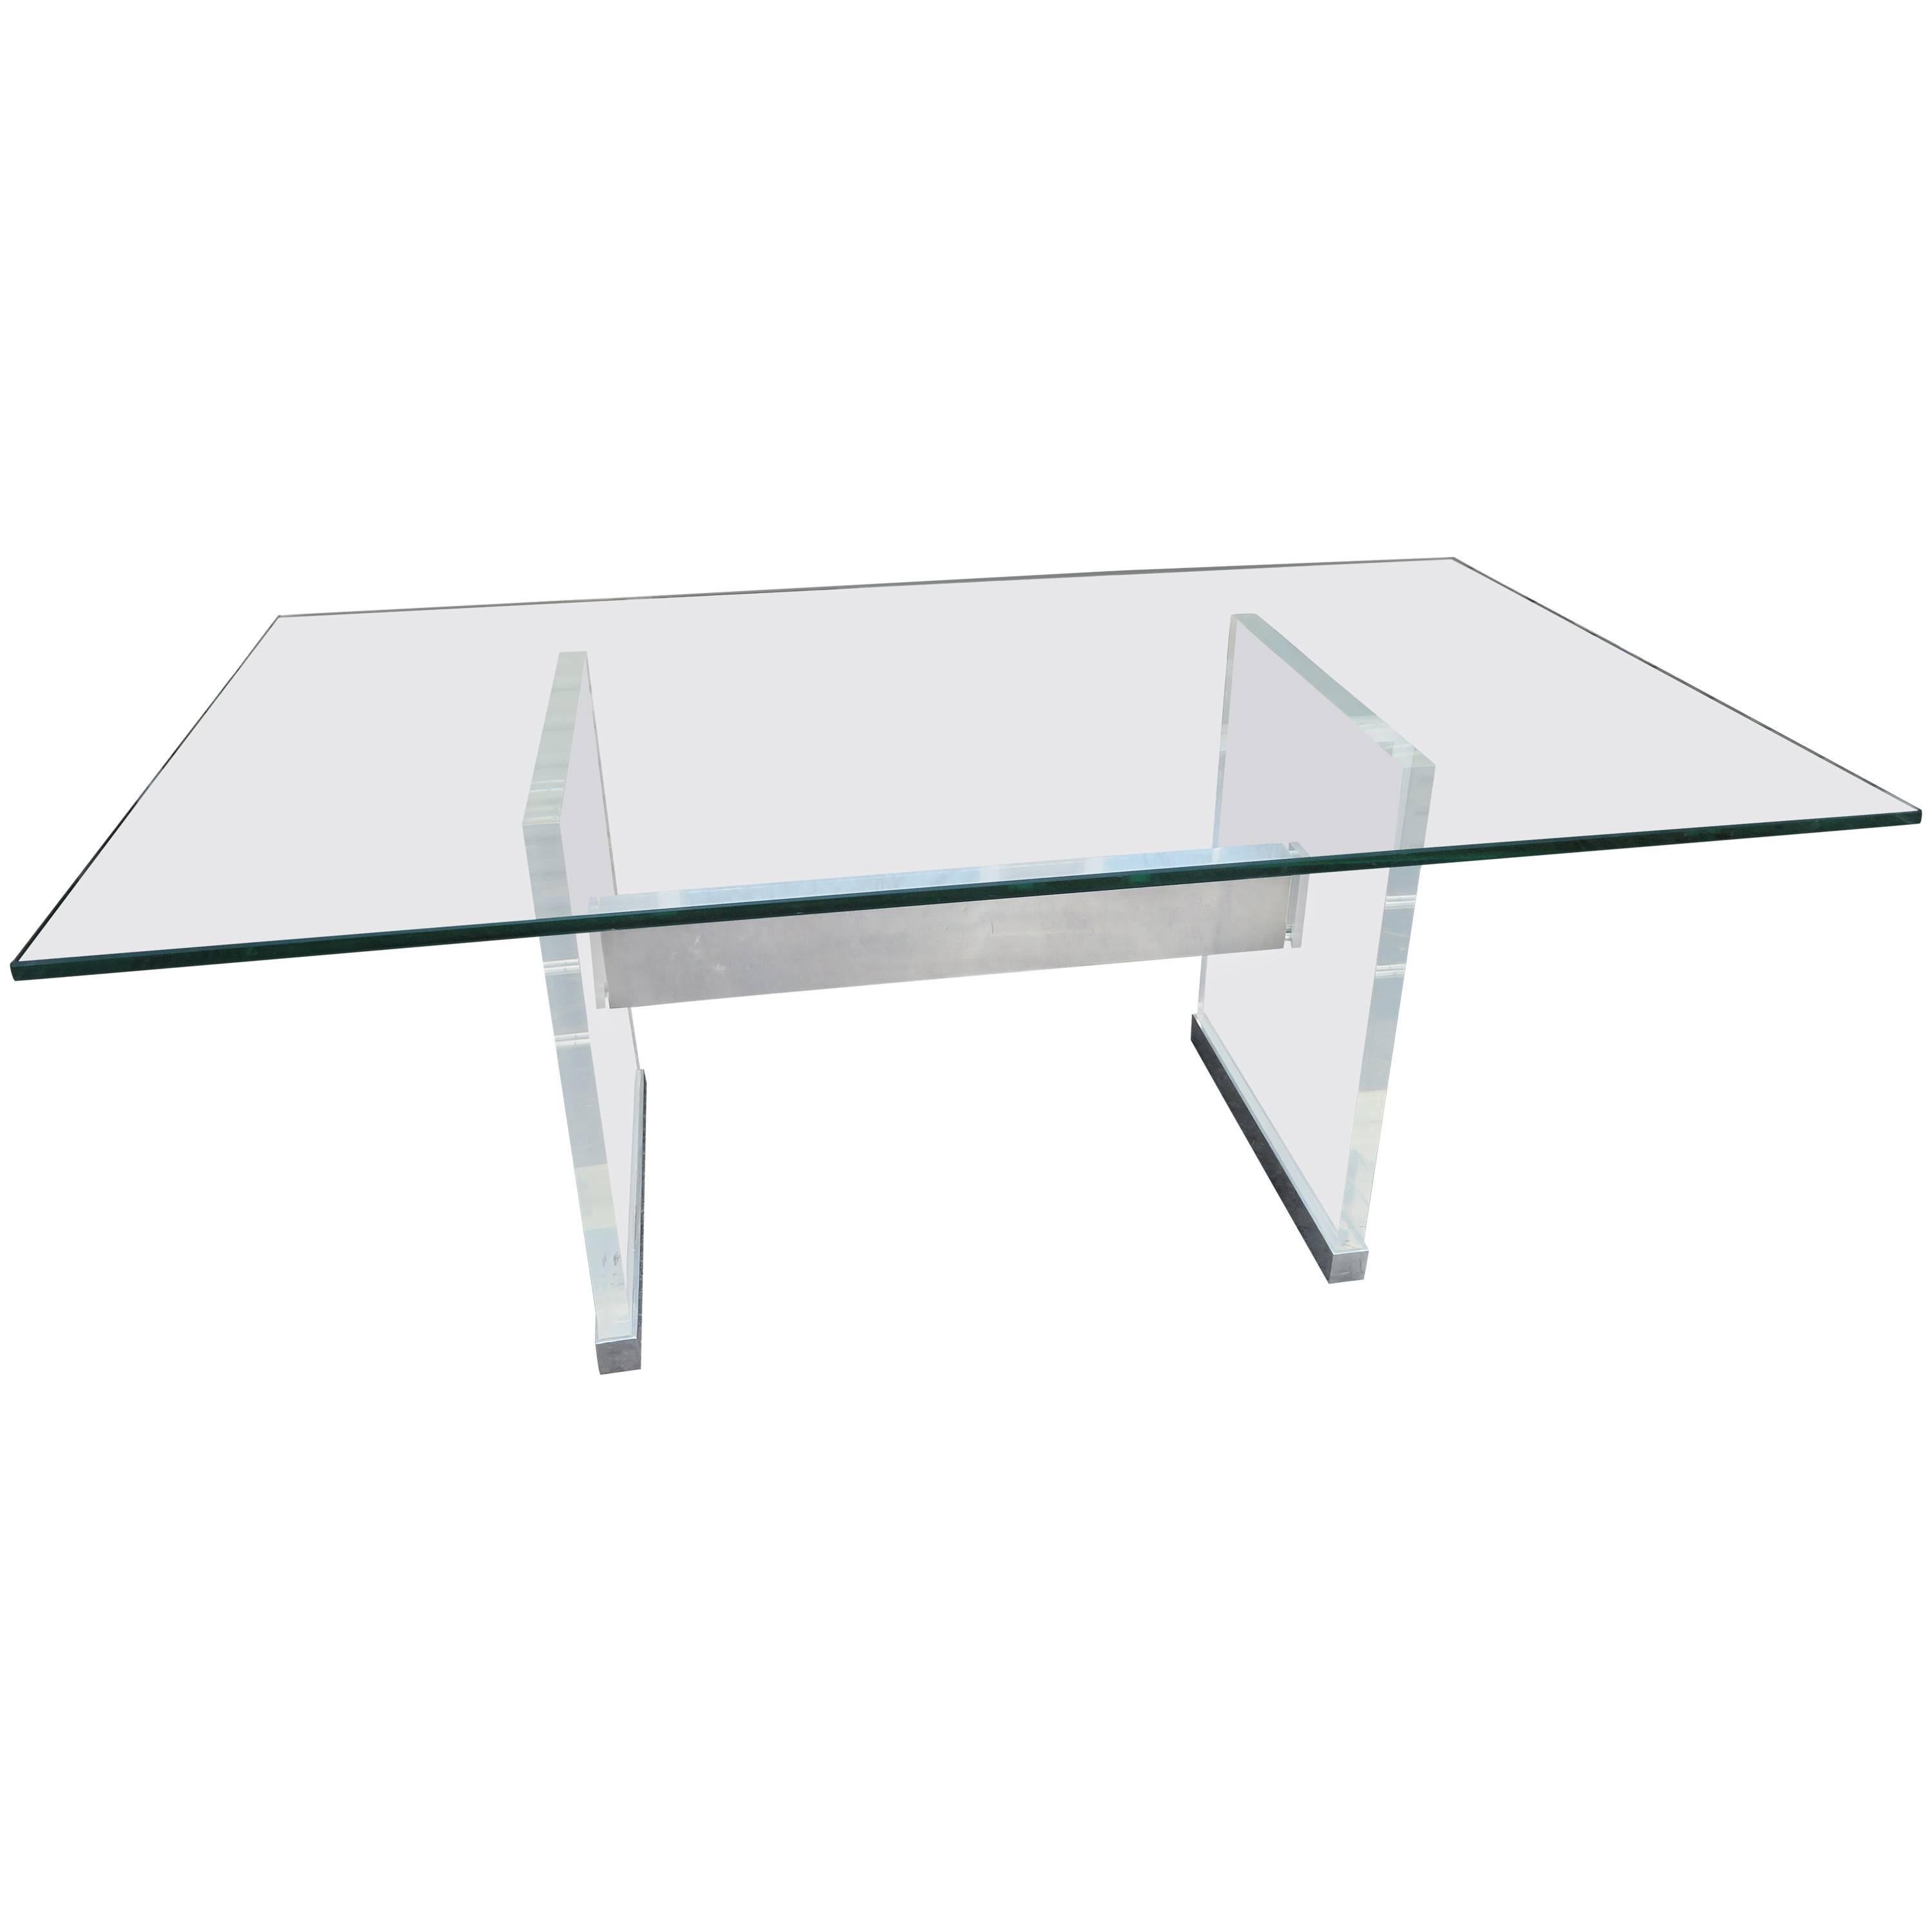 Chunky Thick Lucite Aluminium Dining Room Table Desk Mid-Century Modern